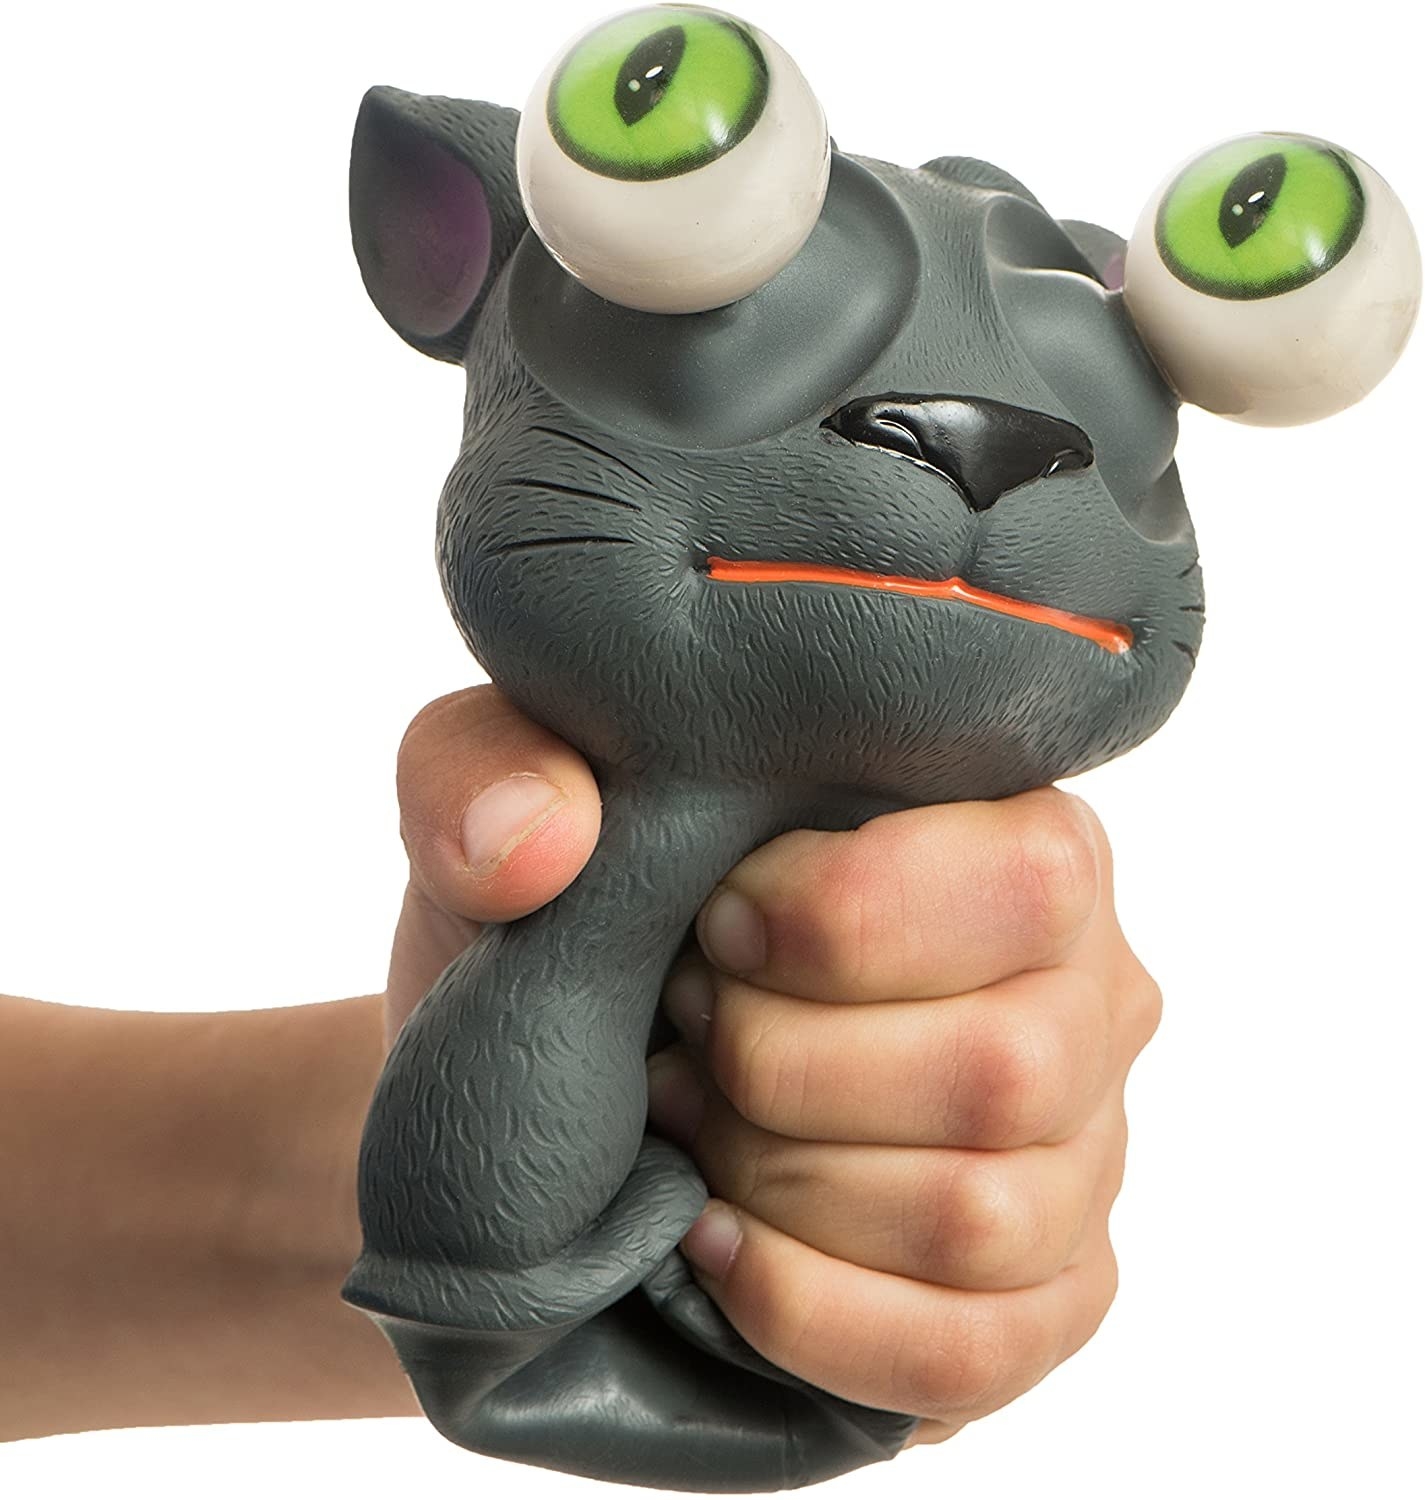 cat squeeze toy with eyes popping out 